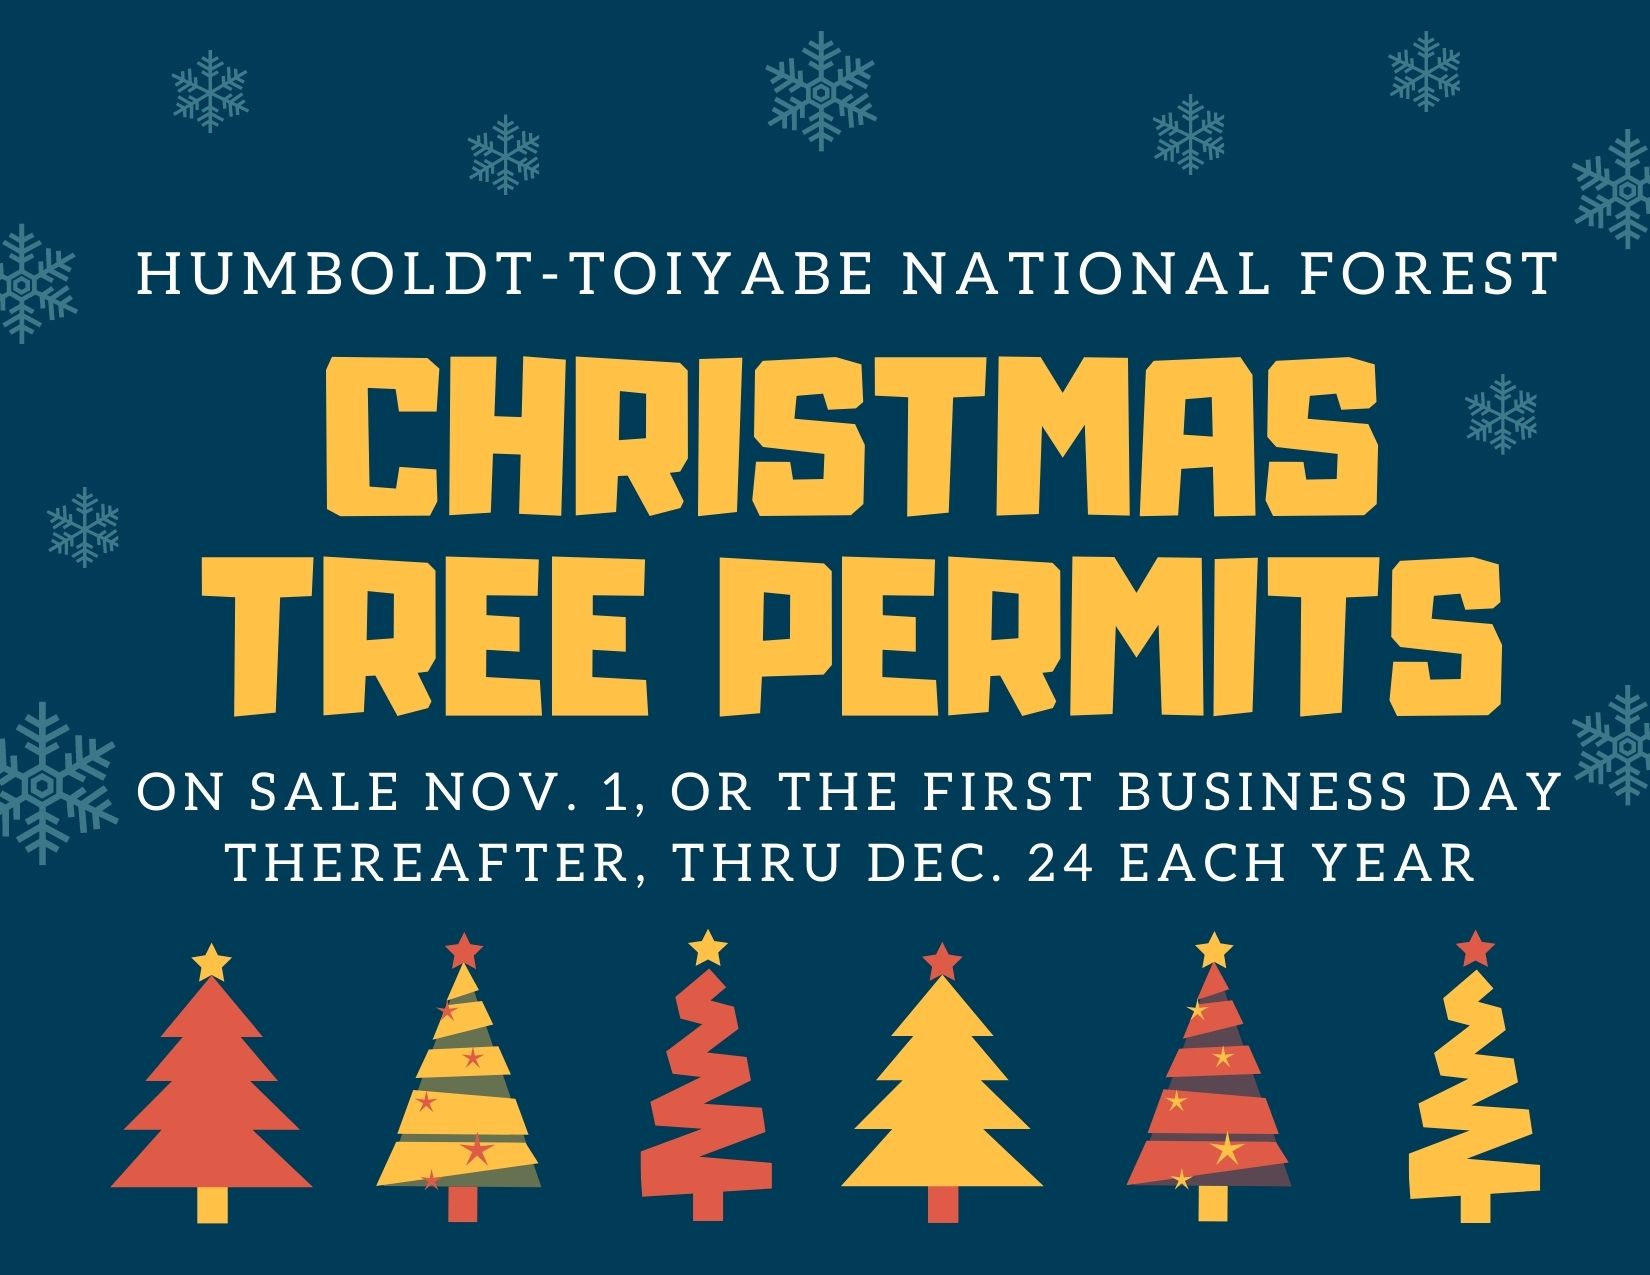 Christmas Trees Sold from Nov. 1, or the first business day thereafter, thru Dec. 24.